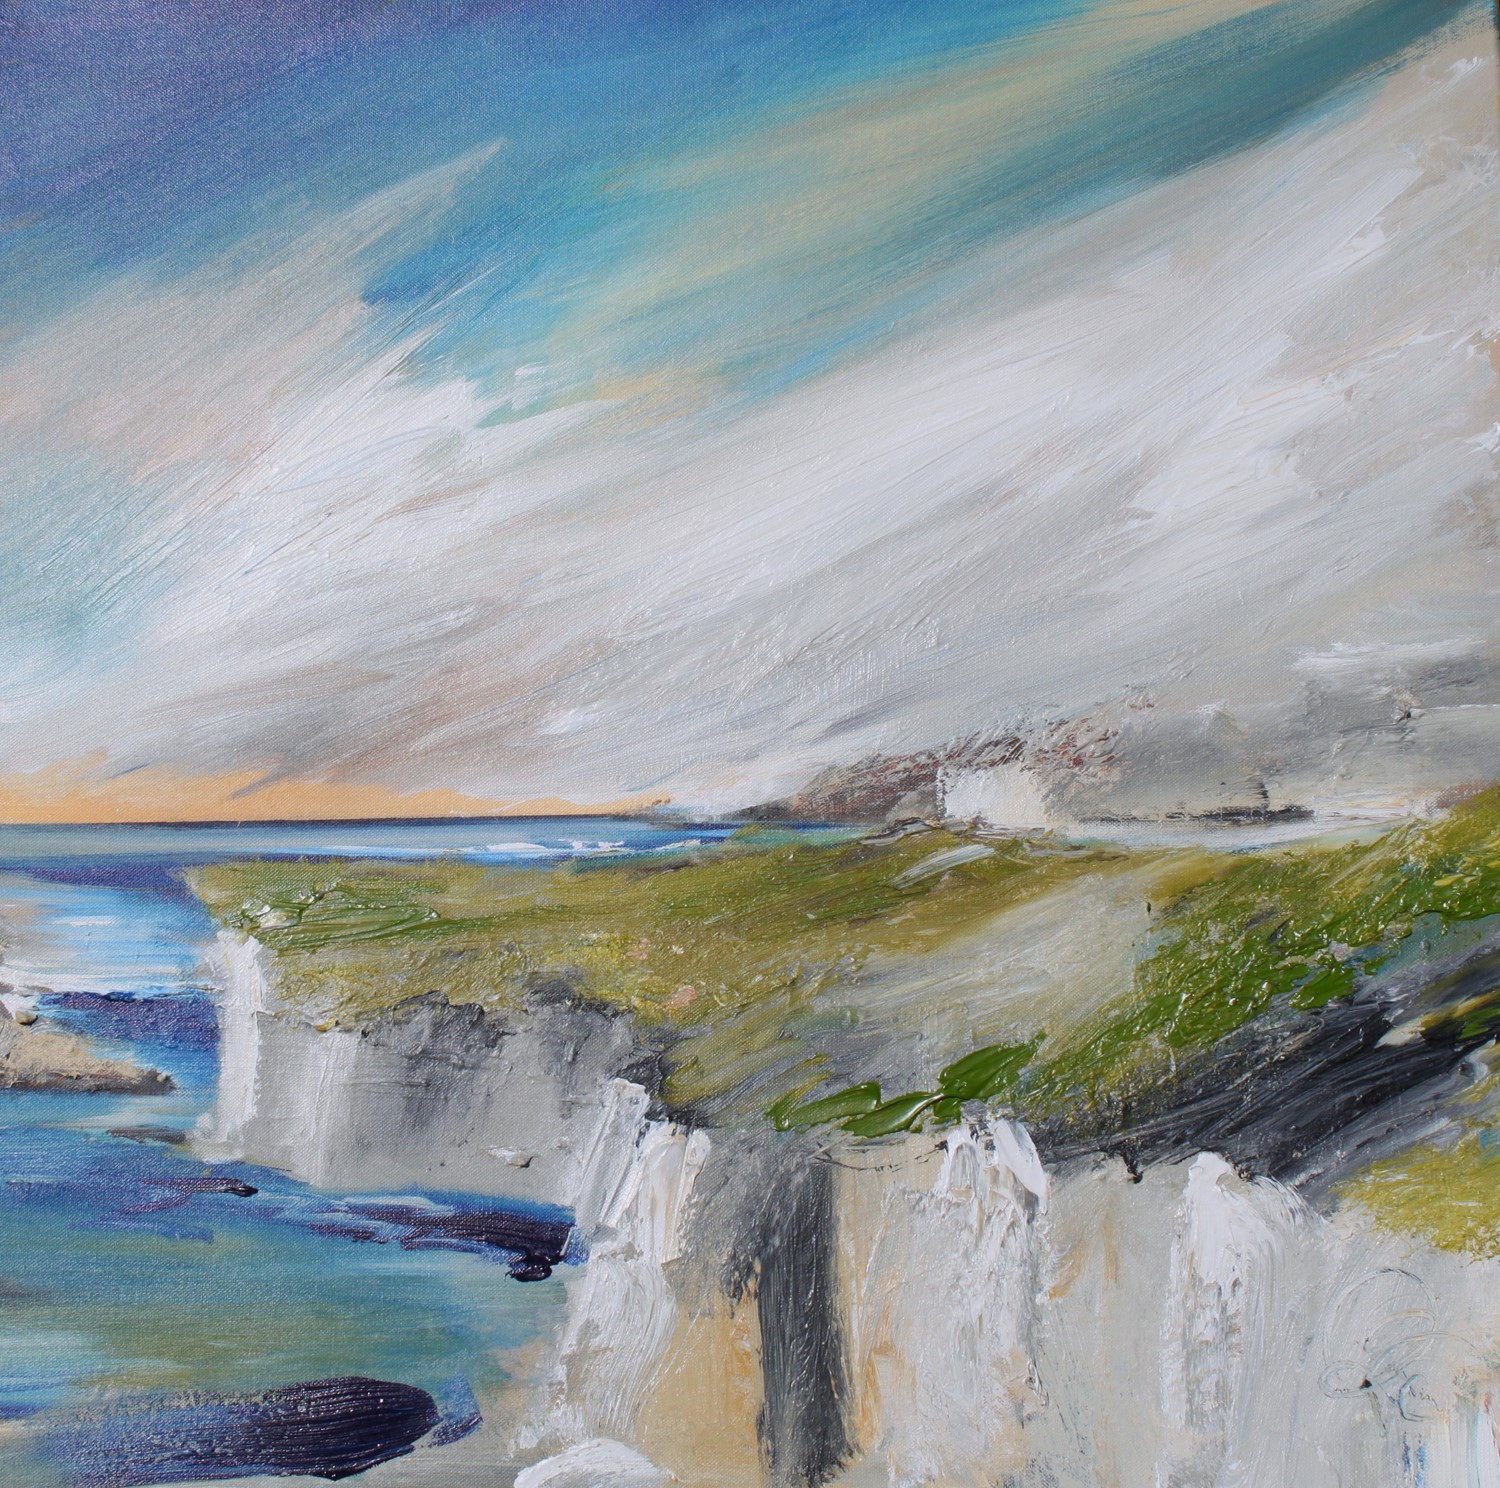 'Blustery at the Cliffs' by artist Rosanne Barr